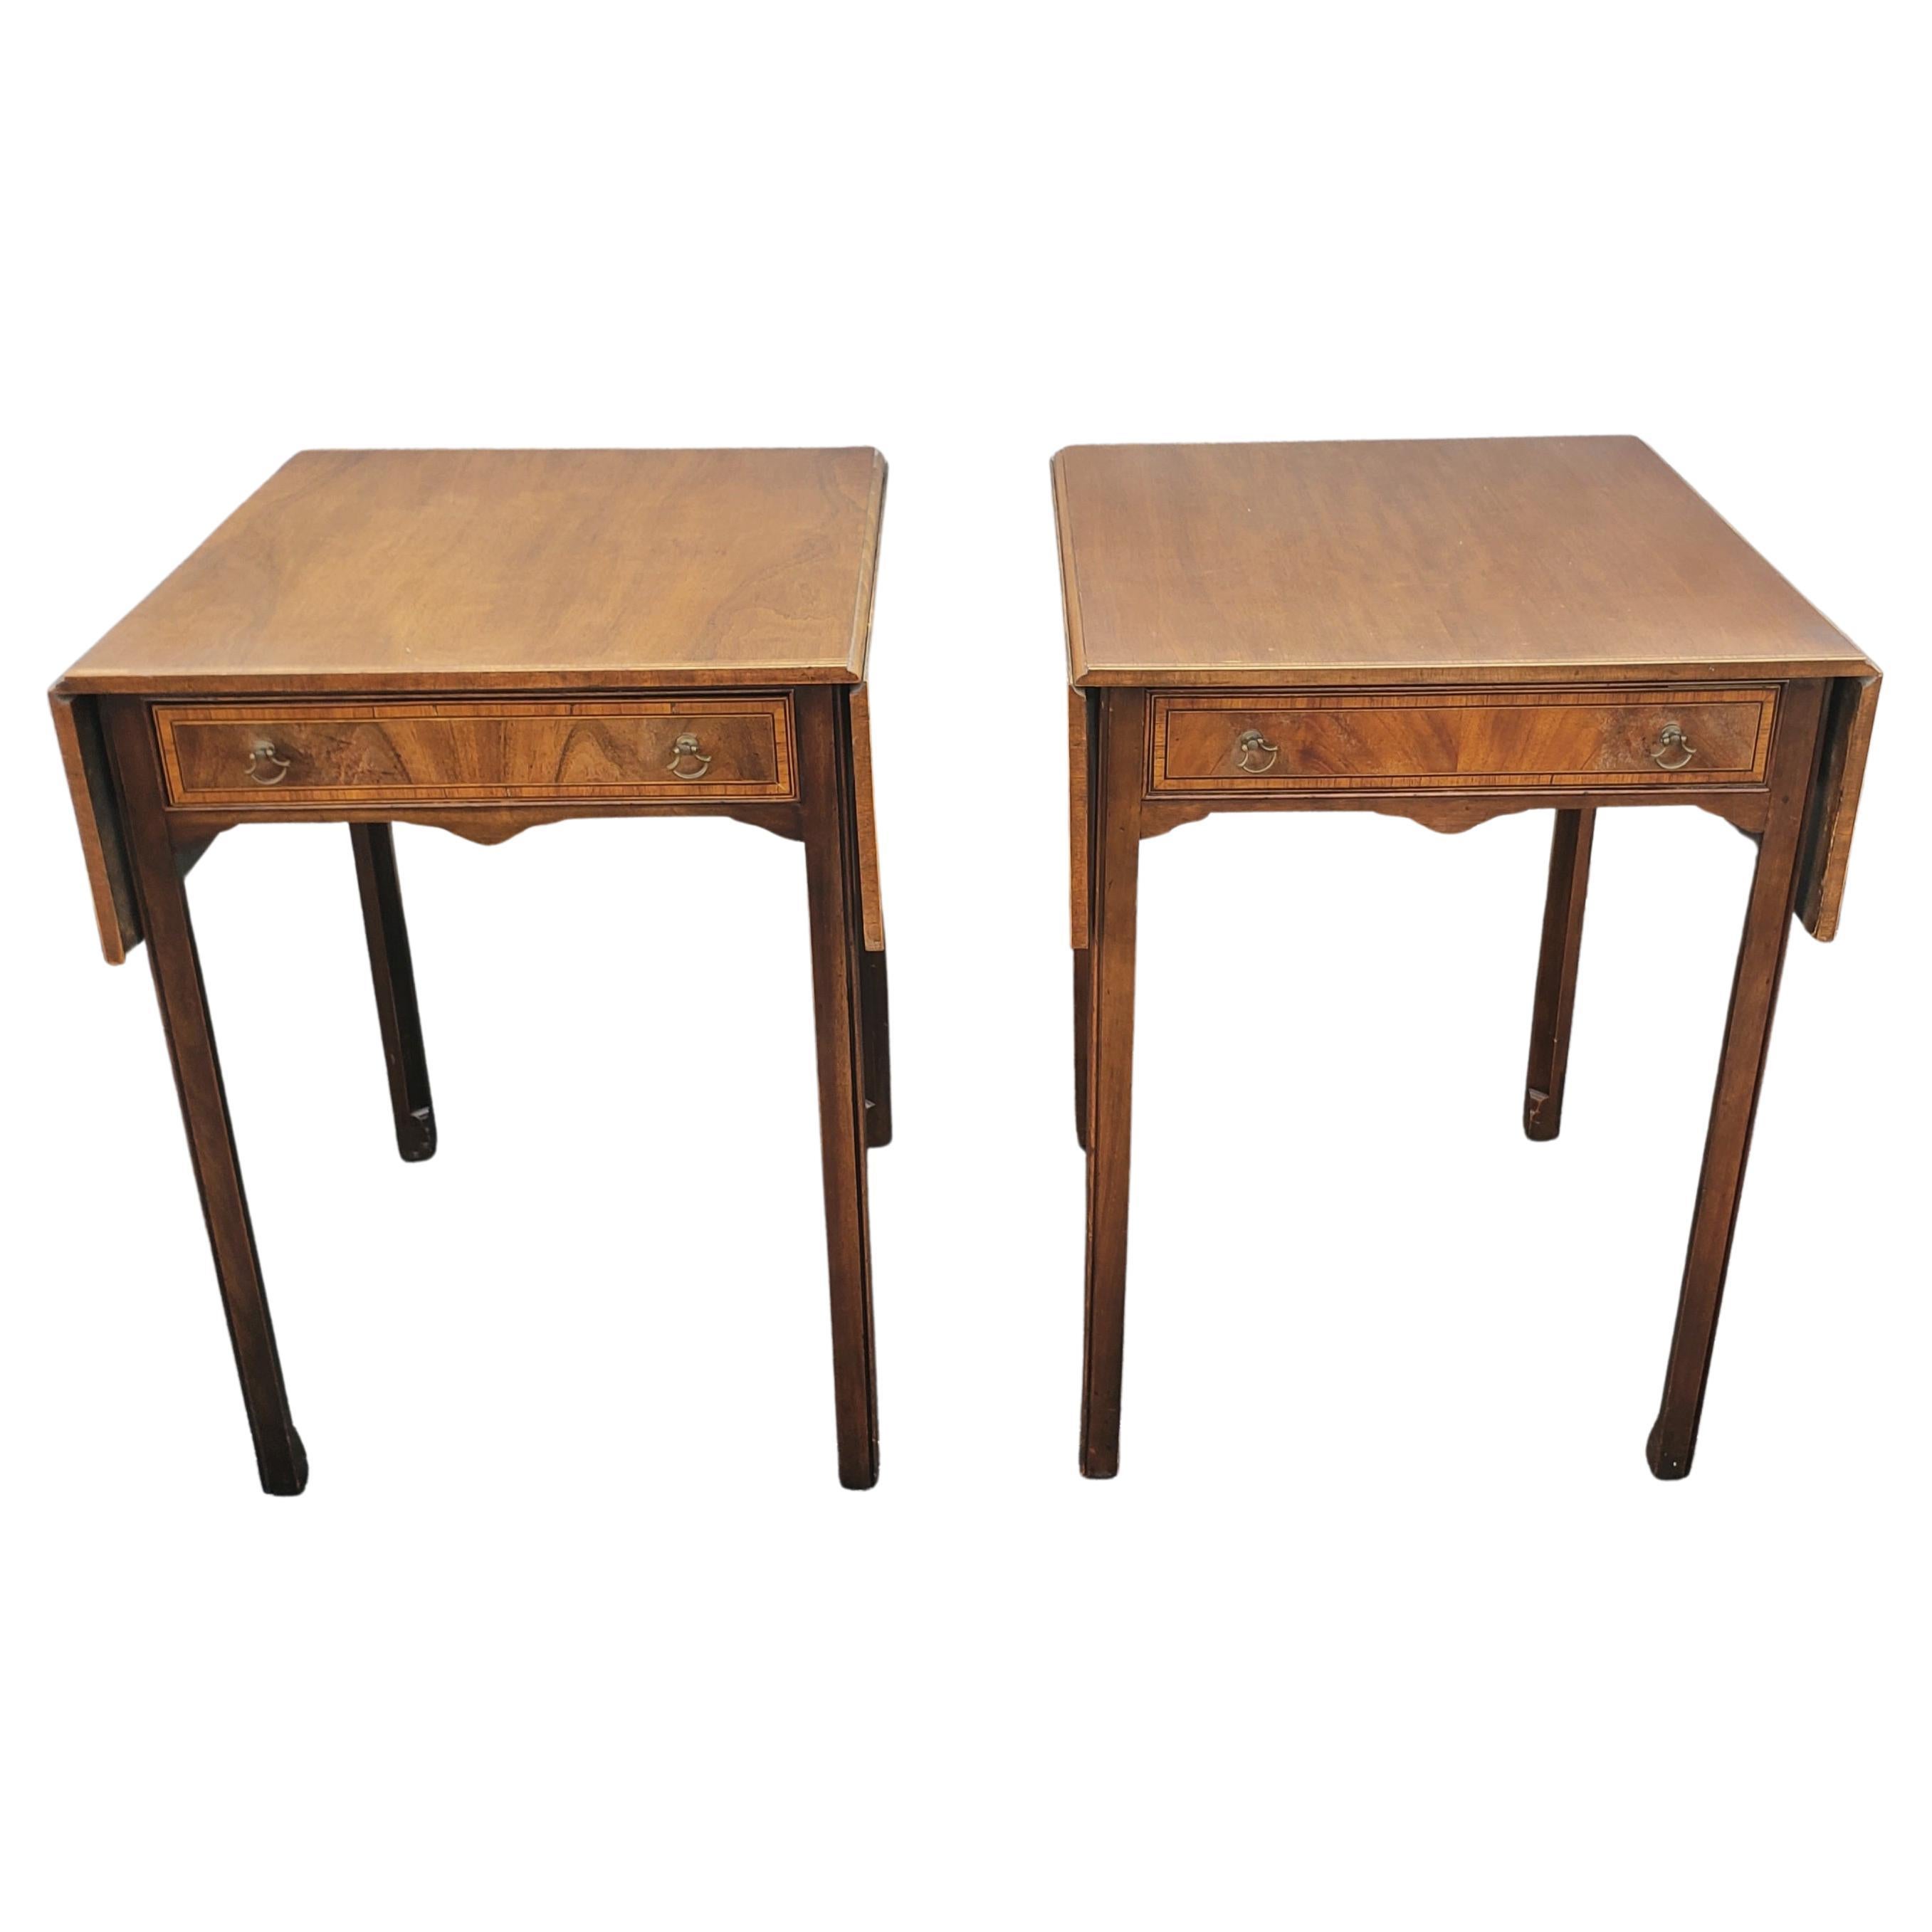 Pair of 1930s George III Cross-Banded Mahogany Inlay Pembroke Tables For Sale